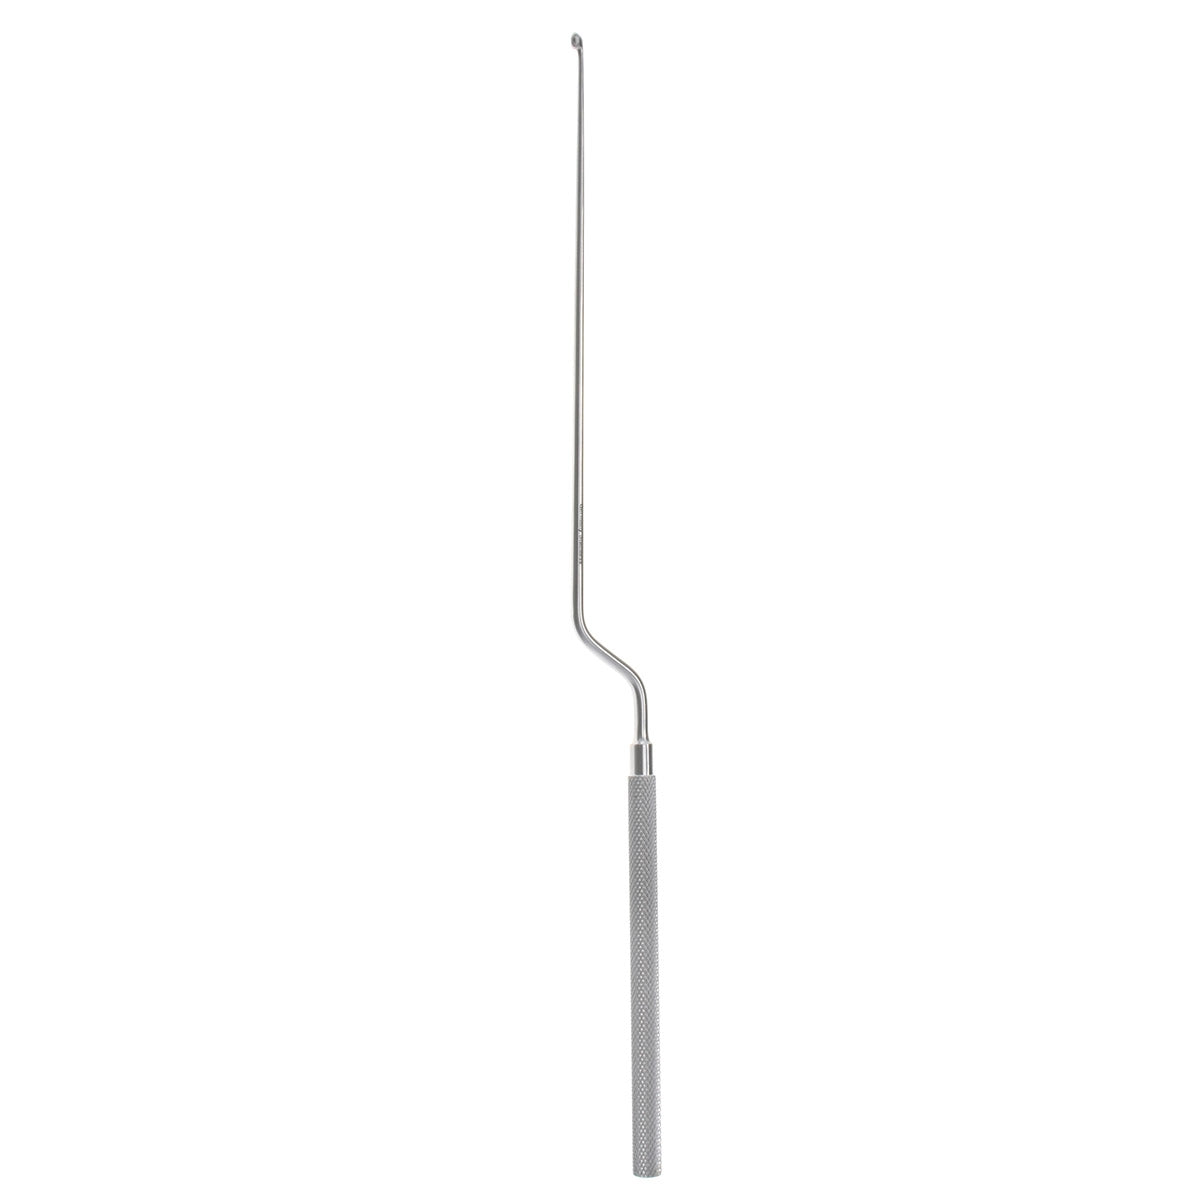 1/2 &Micro Curette 3mm cup straight shaft